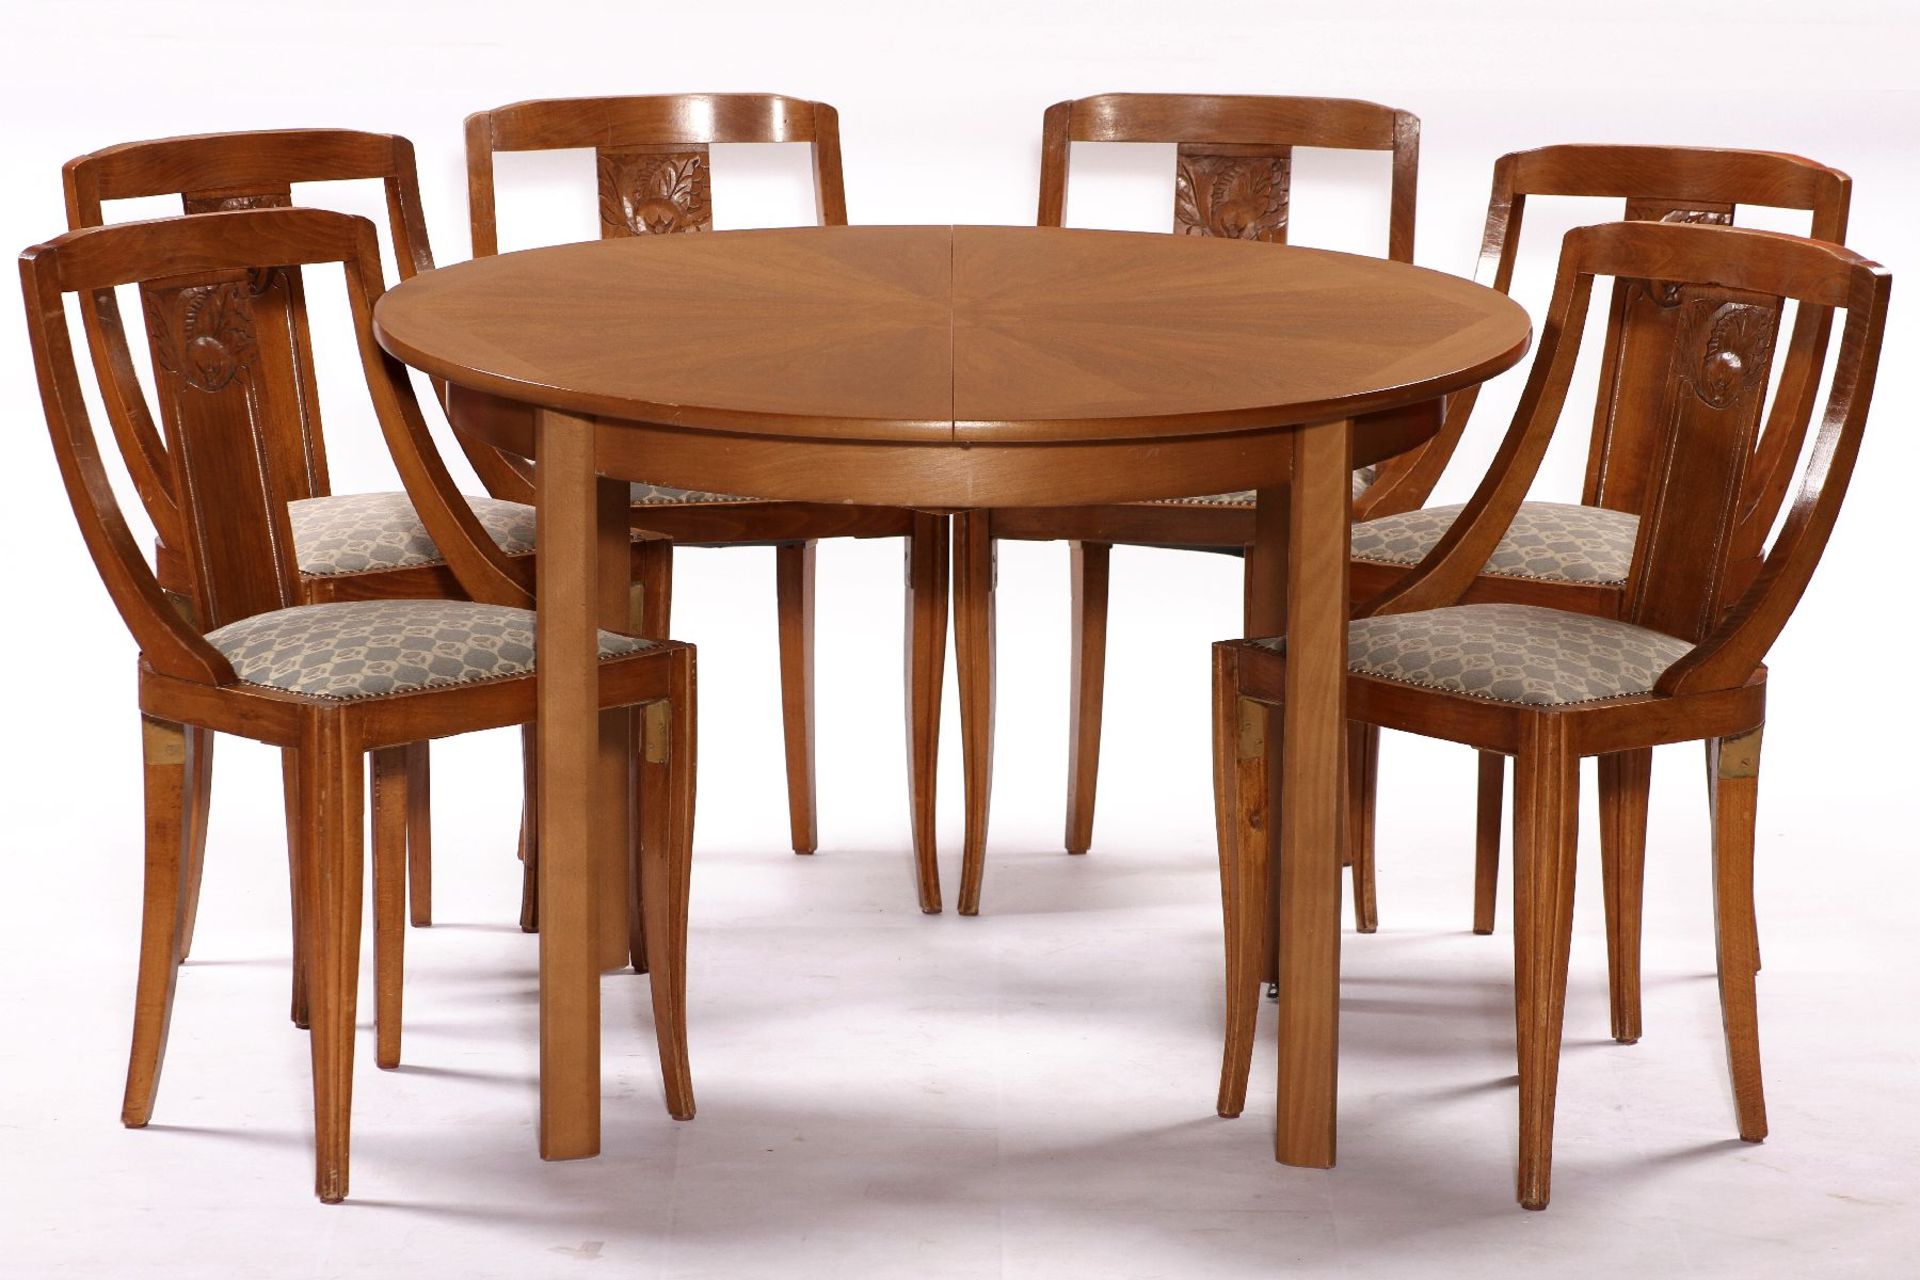 Round extending table with 6 chairs, in the style of the French Art Deco from 1930/35, solid beech